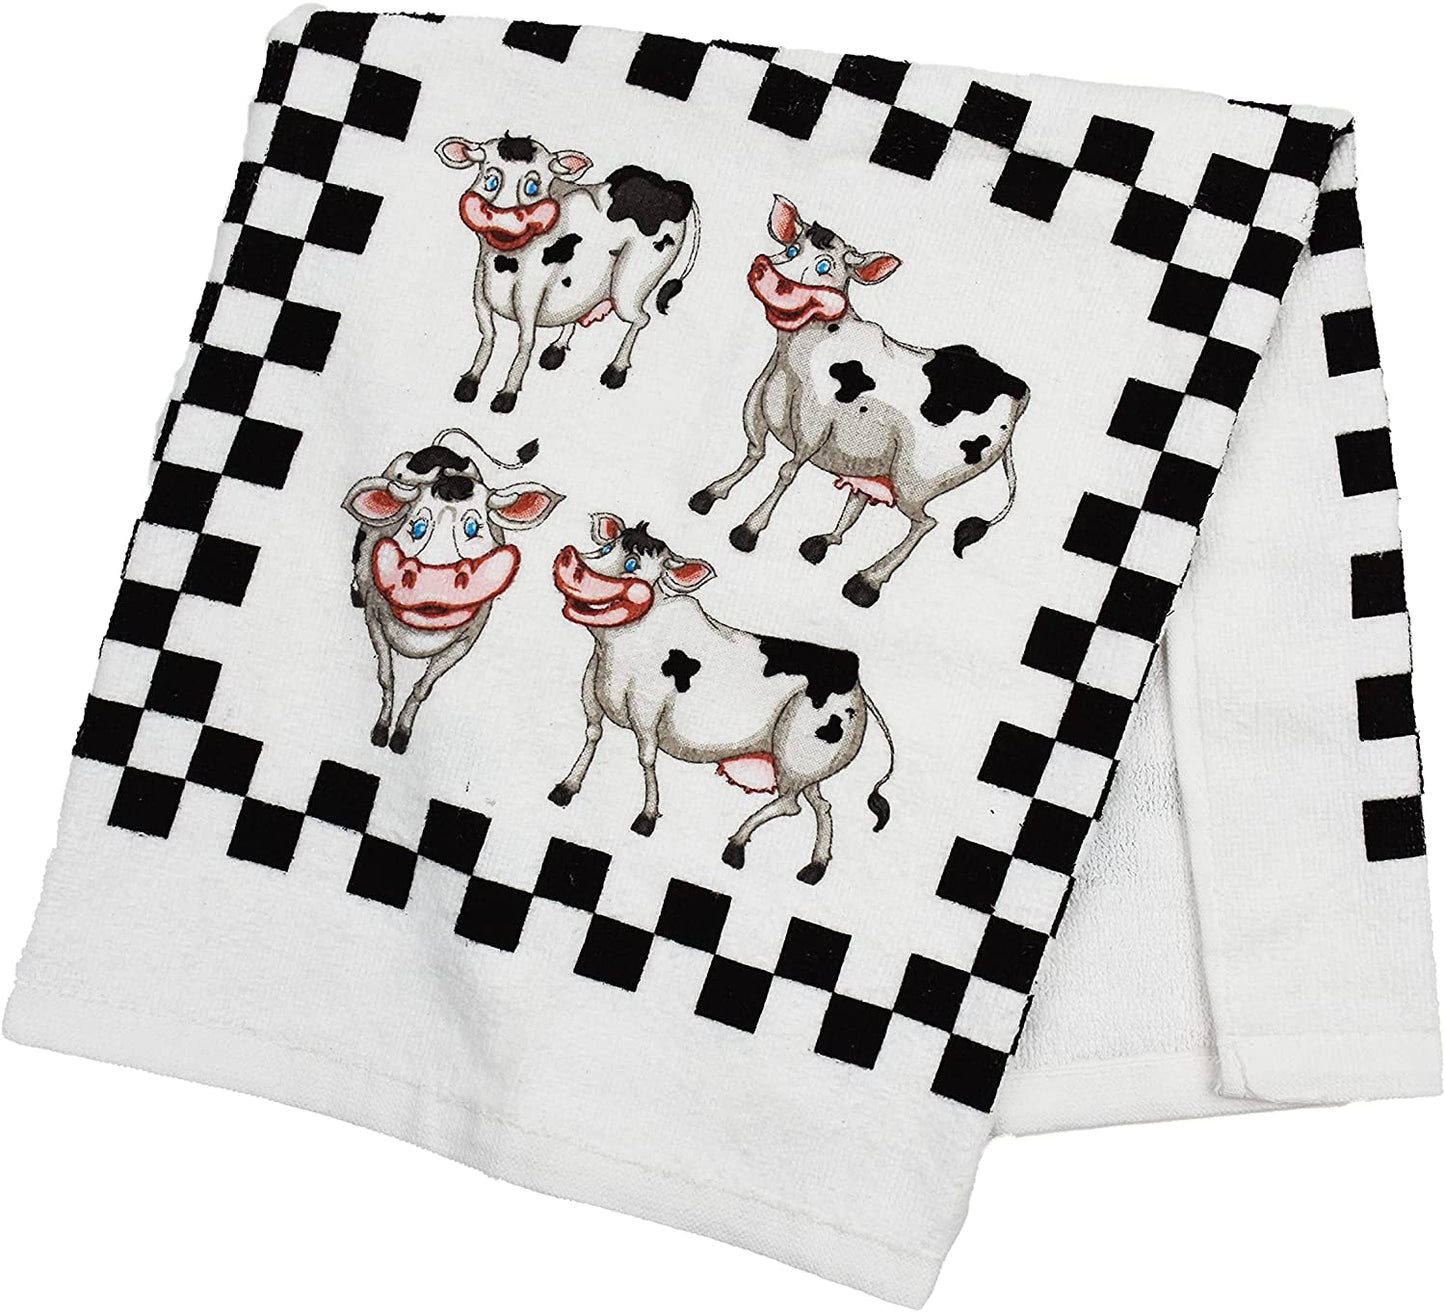 AWW GIFFTS Laughing Cows Multi-Use Kitchen Tea Towel | 100% Cotton Twill Pattern with Hanging Loop